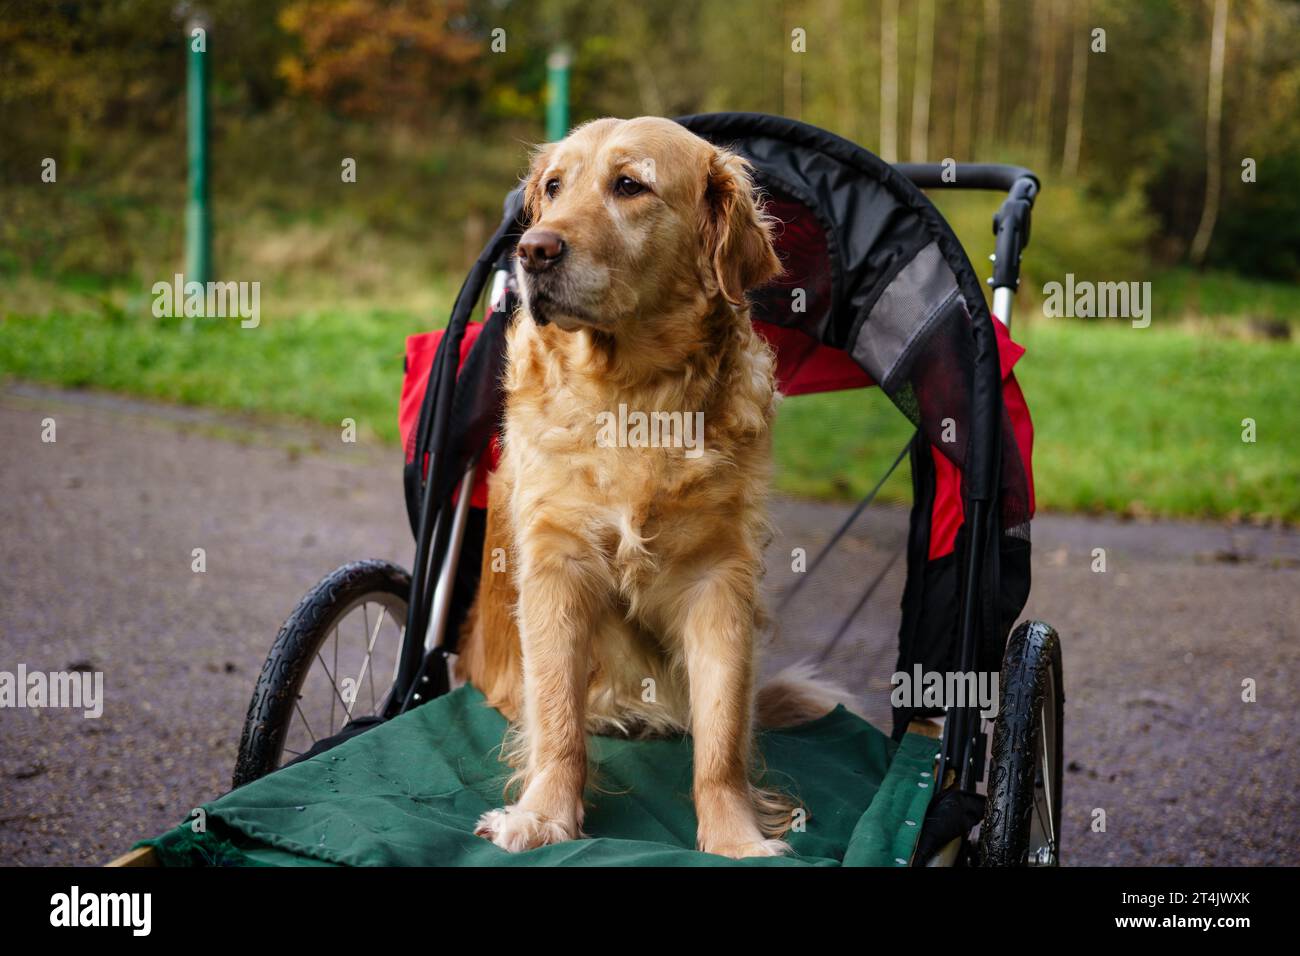 Golden Retriever dog sat in stroller buggy after a leg injury helping its recuperation with country walks Stock Photo